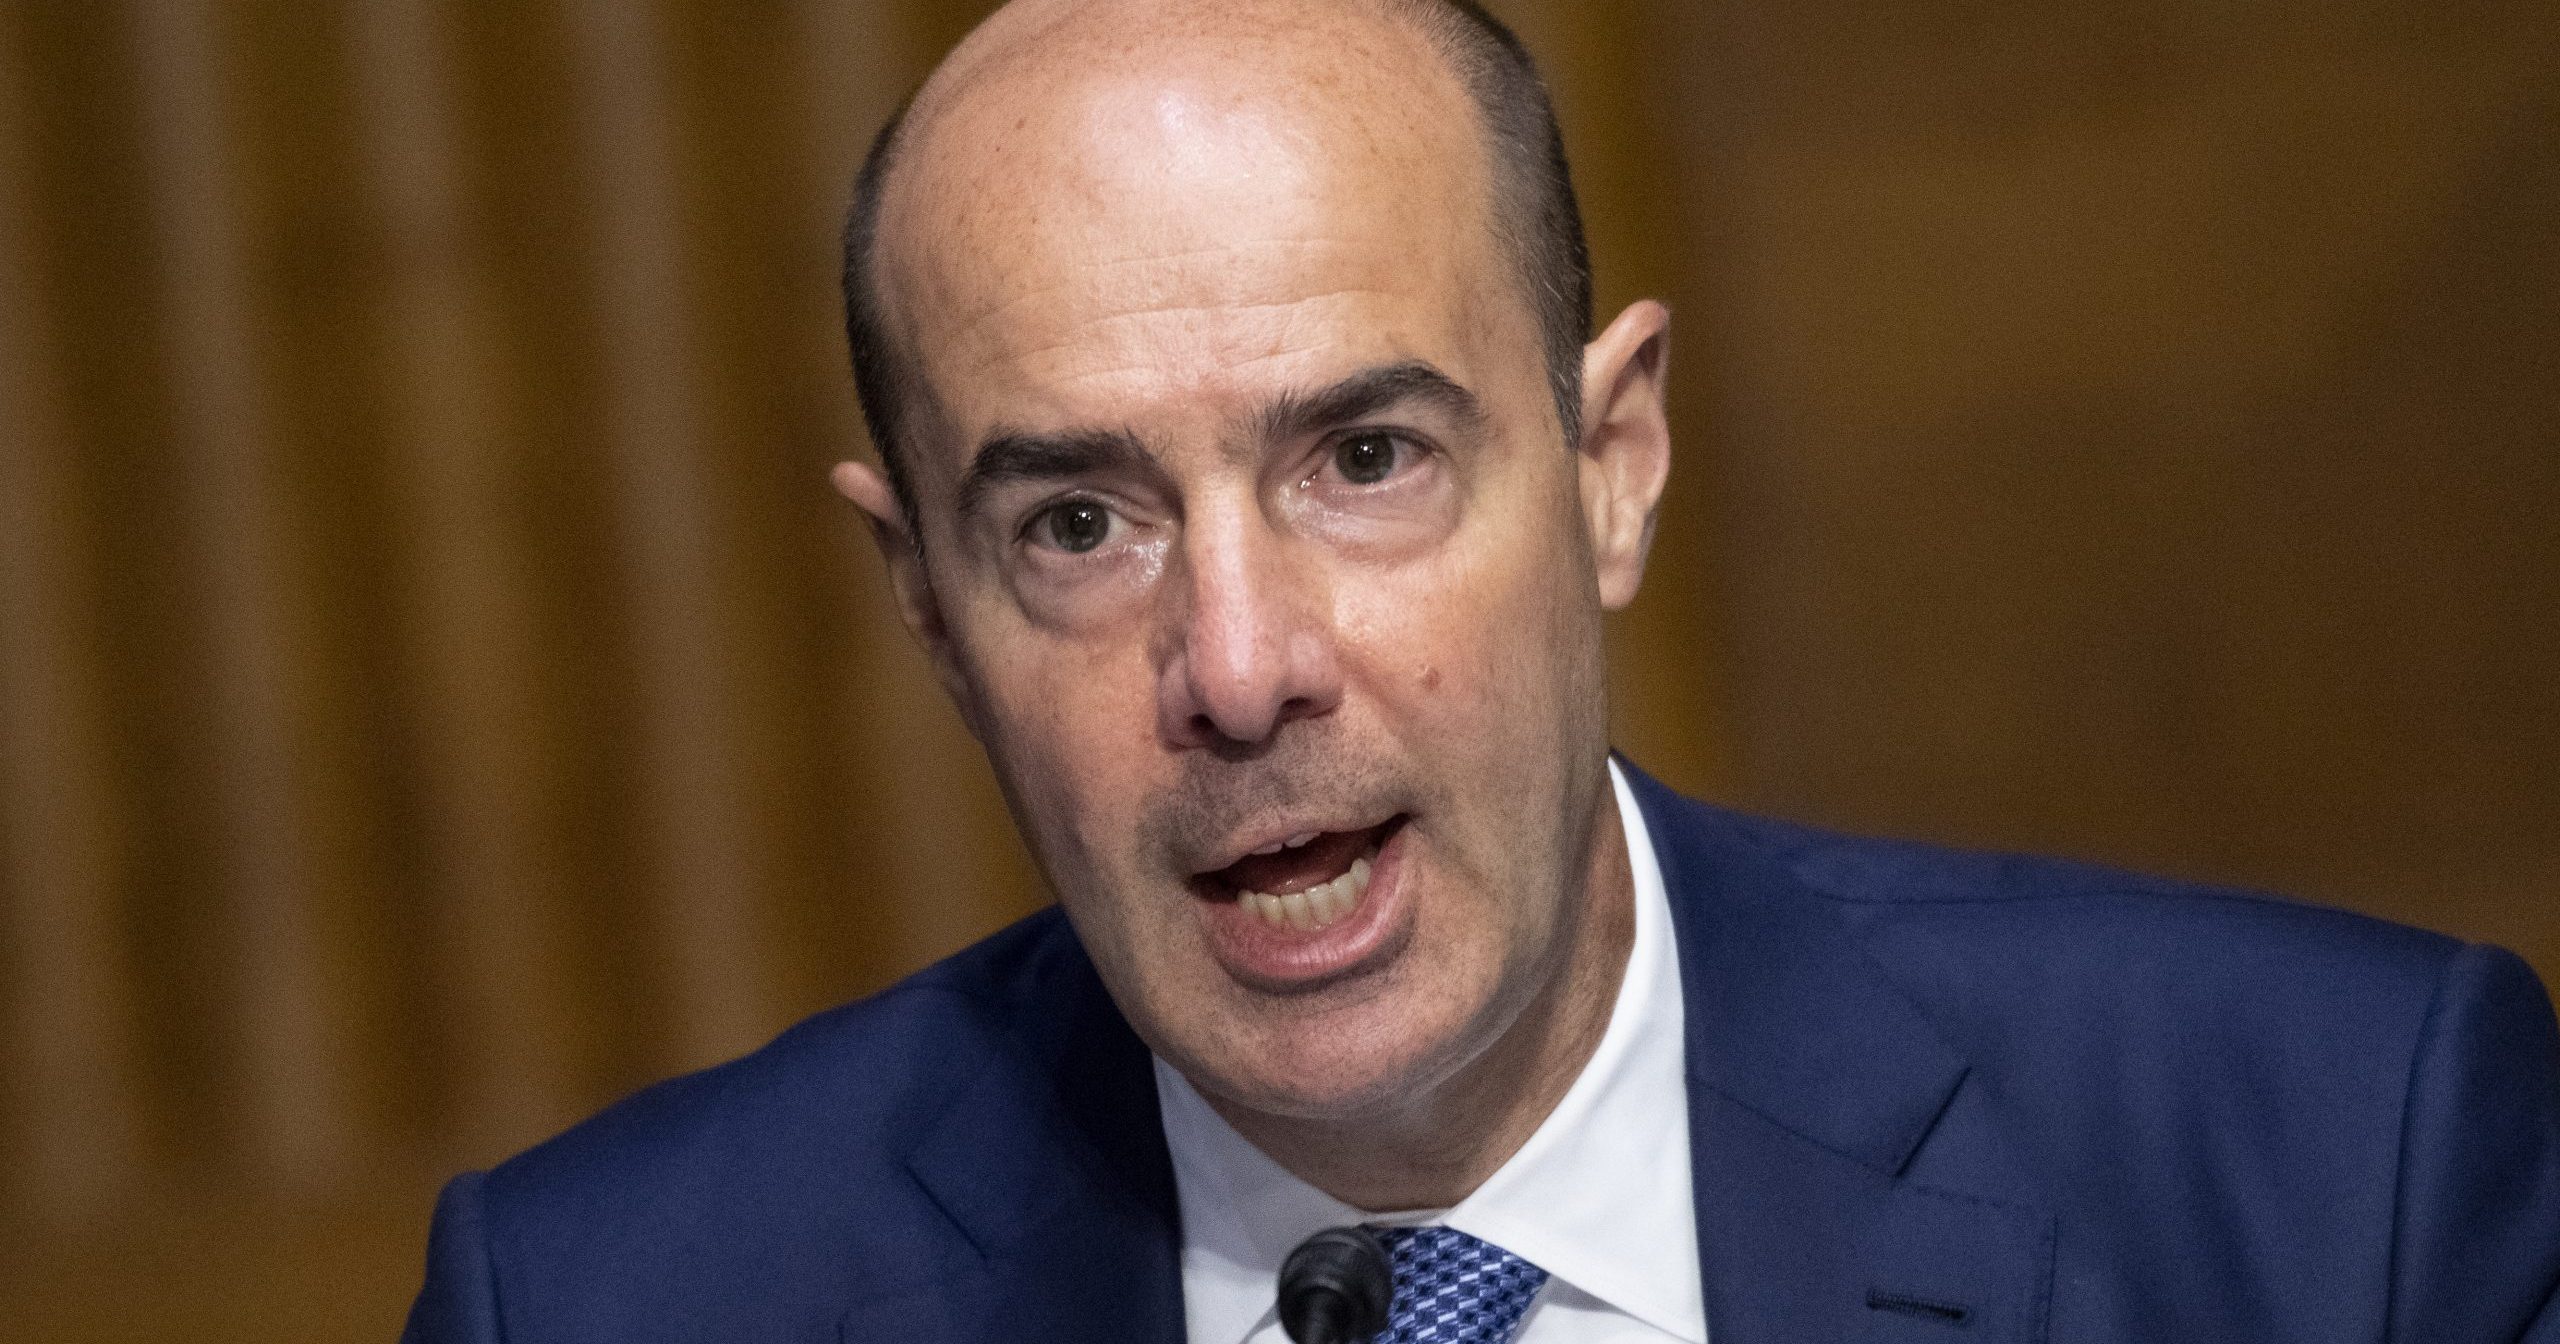 Labor Secretary Eugene Scalia testifies during a Senate Finance Committee hearing on COVID-19 unemployment insurance on Capitol Hill on June 9, 2020.